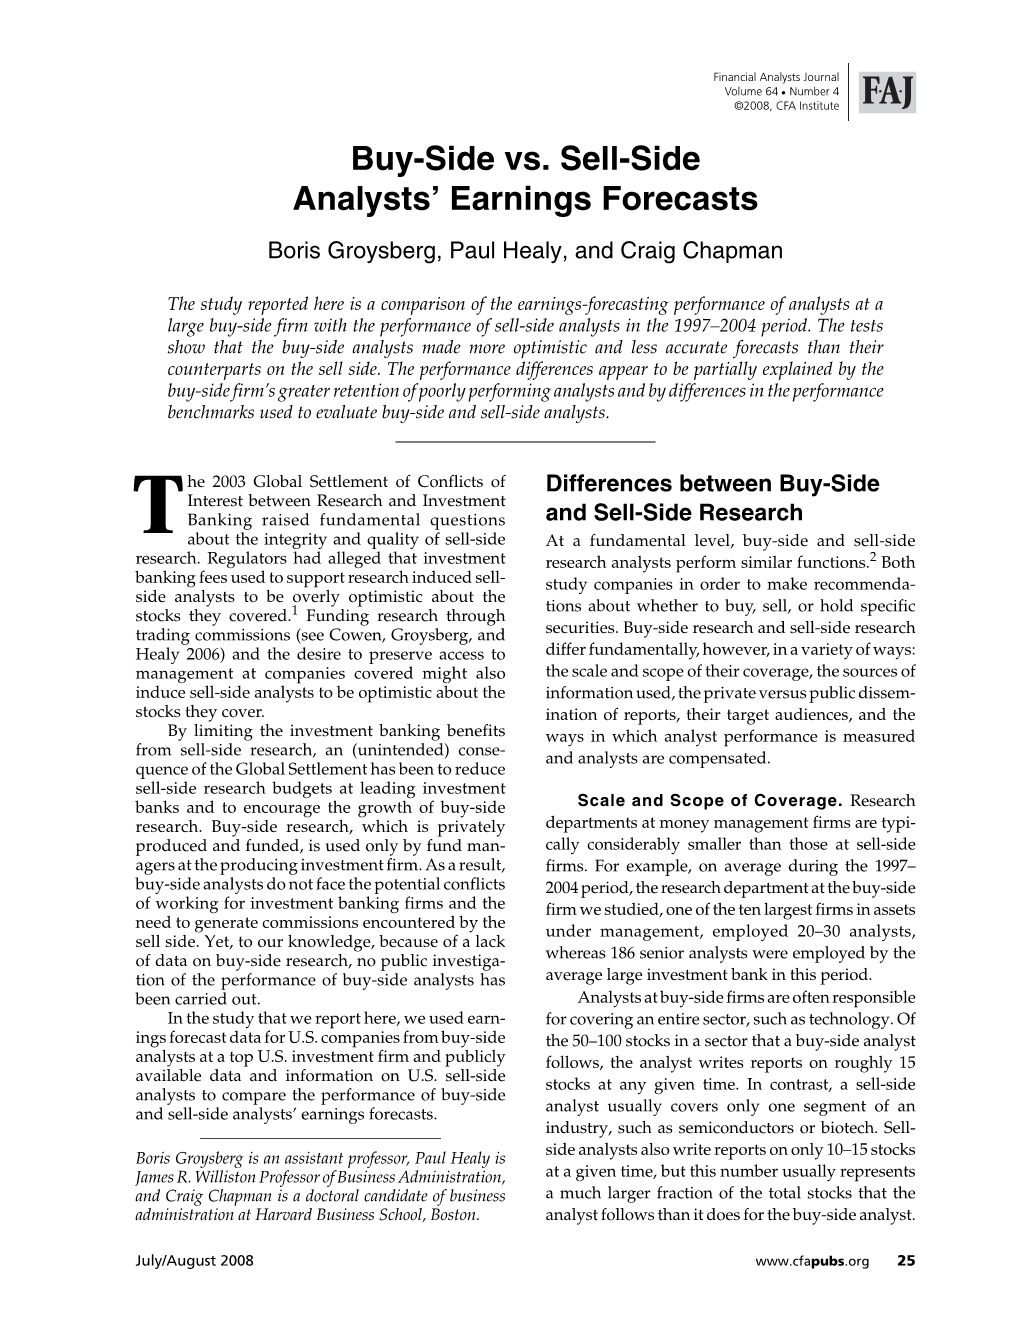 Buy-Side Vs. Sell-Side Analysts' Earnings Forecasts